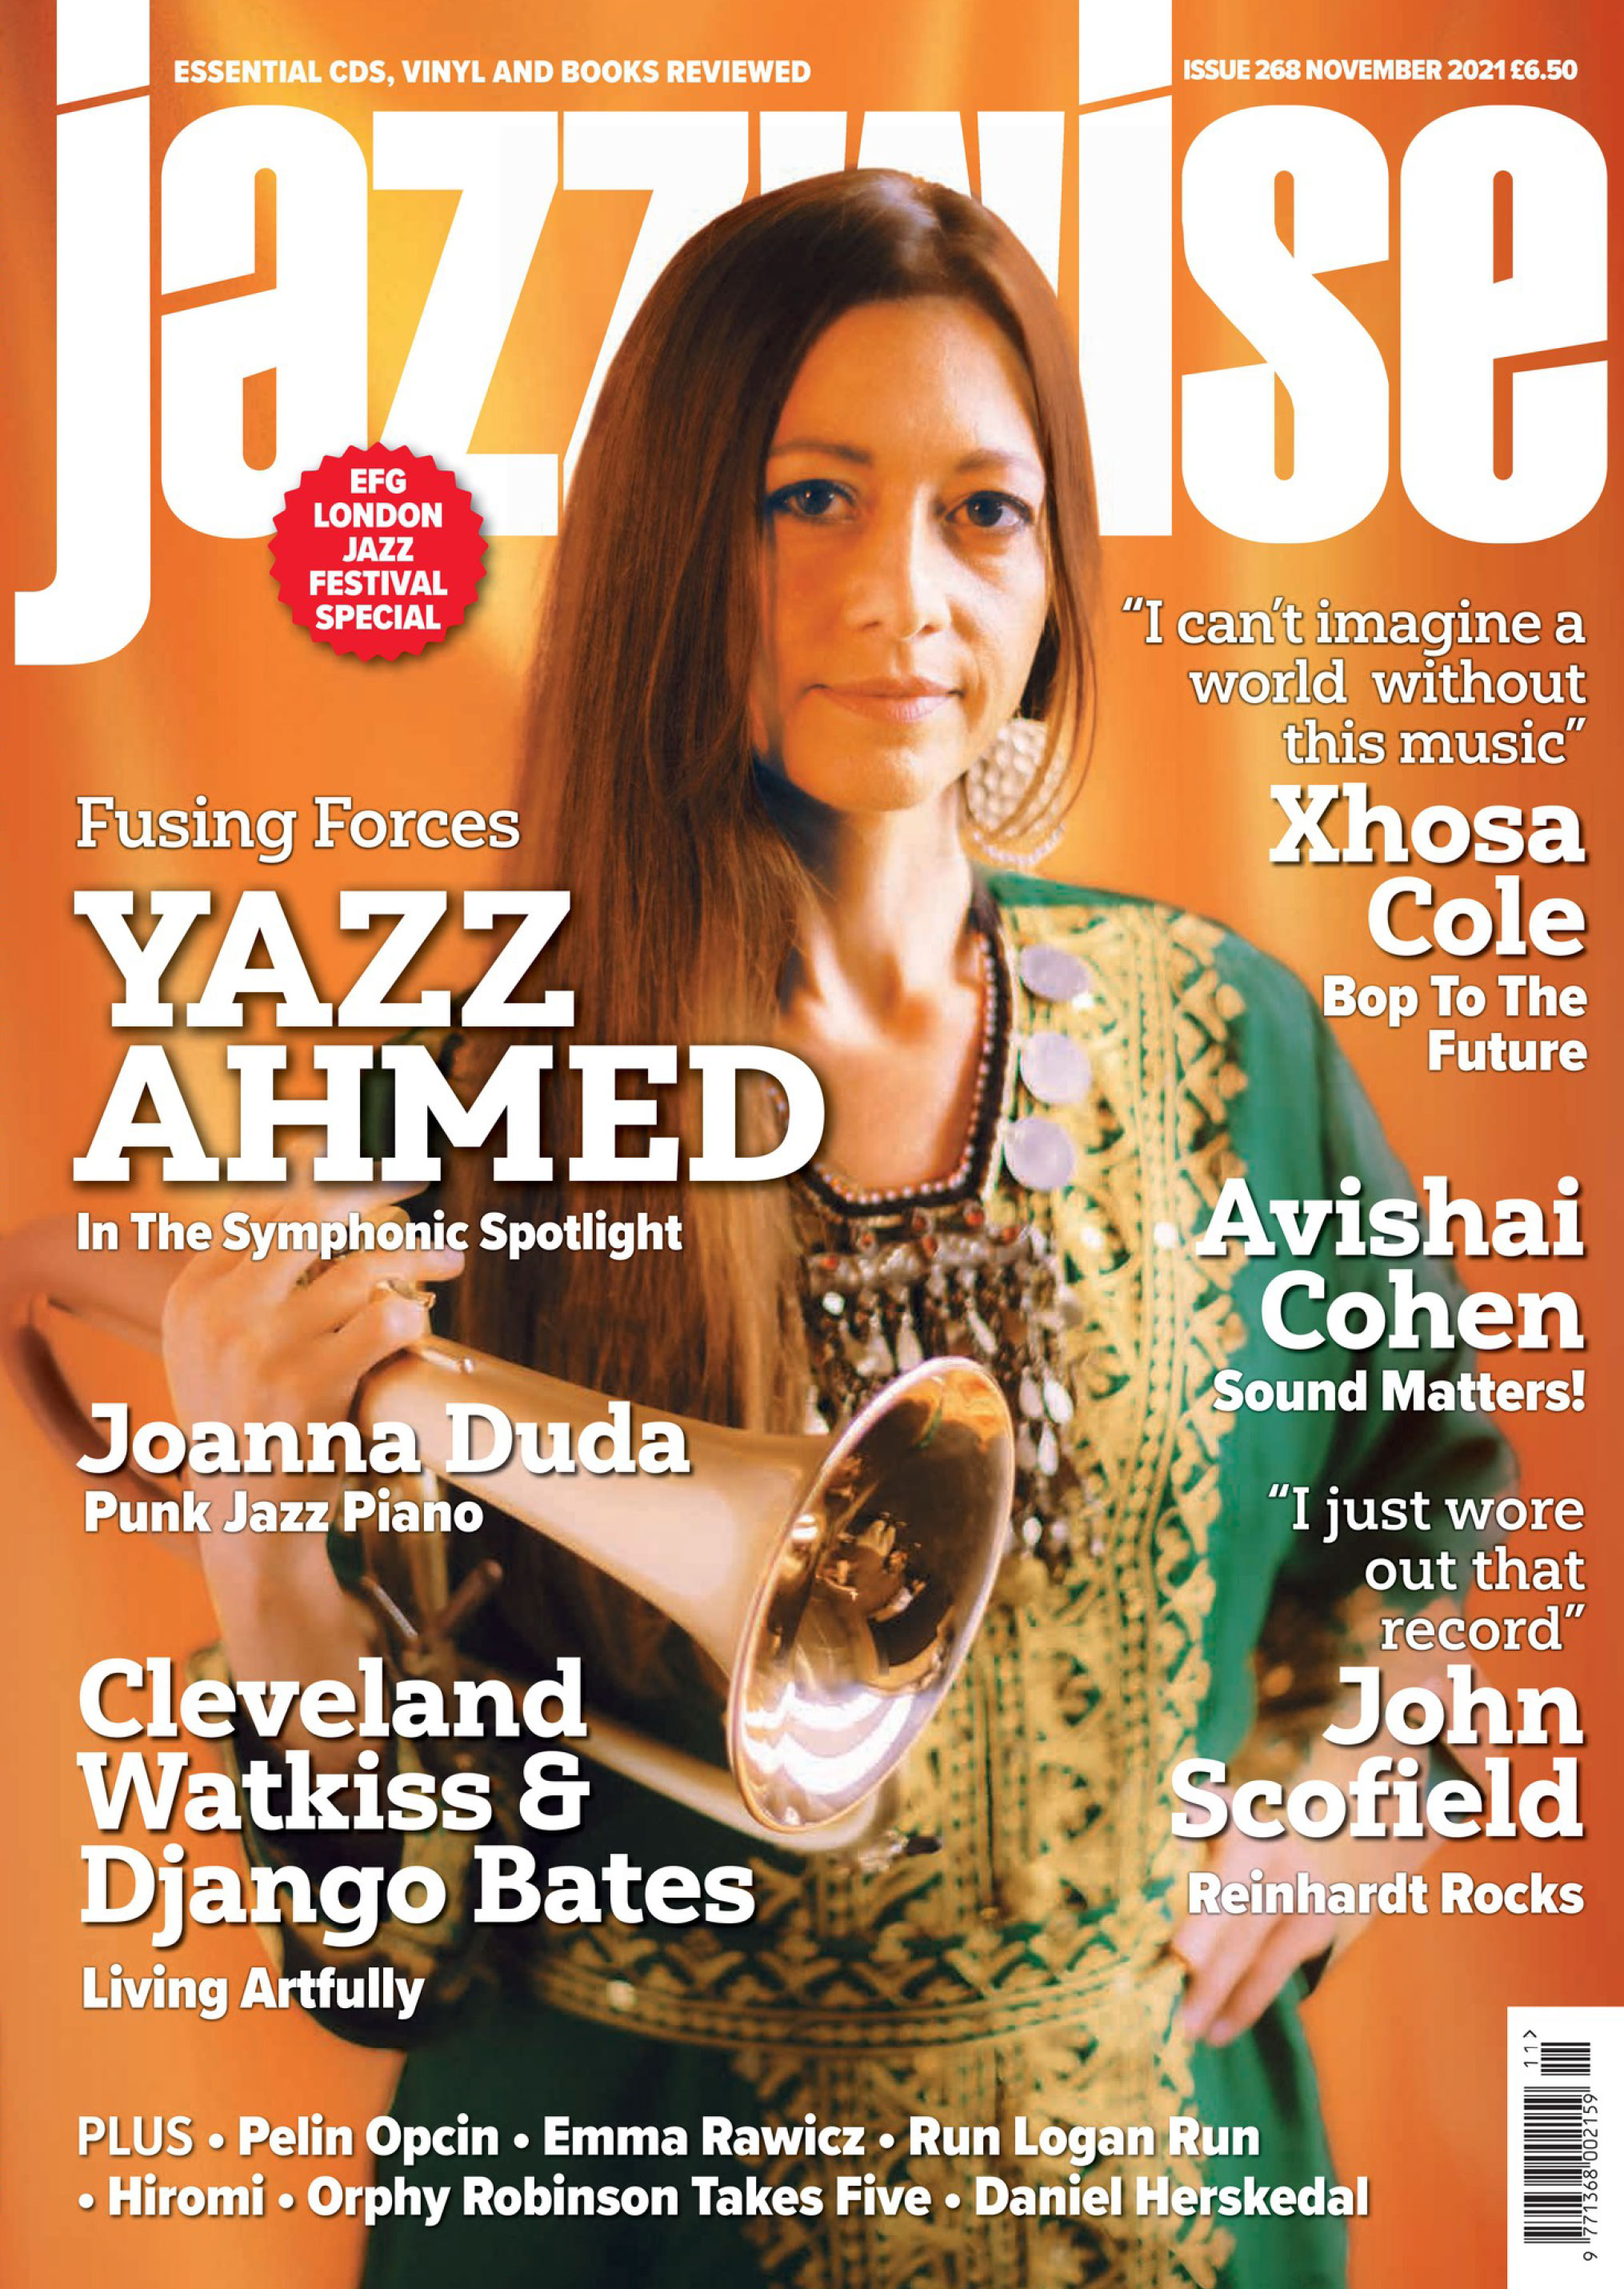 Introducing the November 2021 issue of Jazzwise | Jazzwise